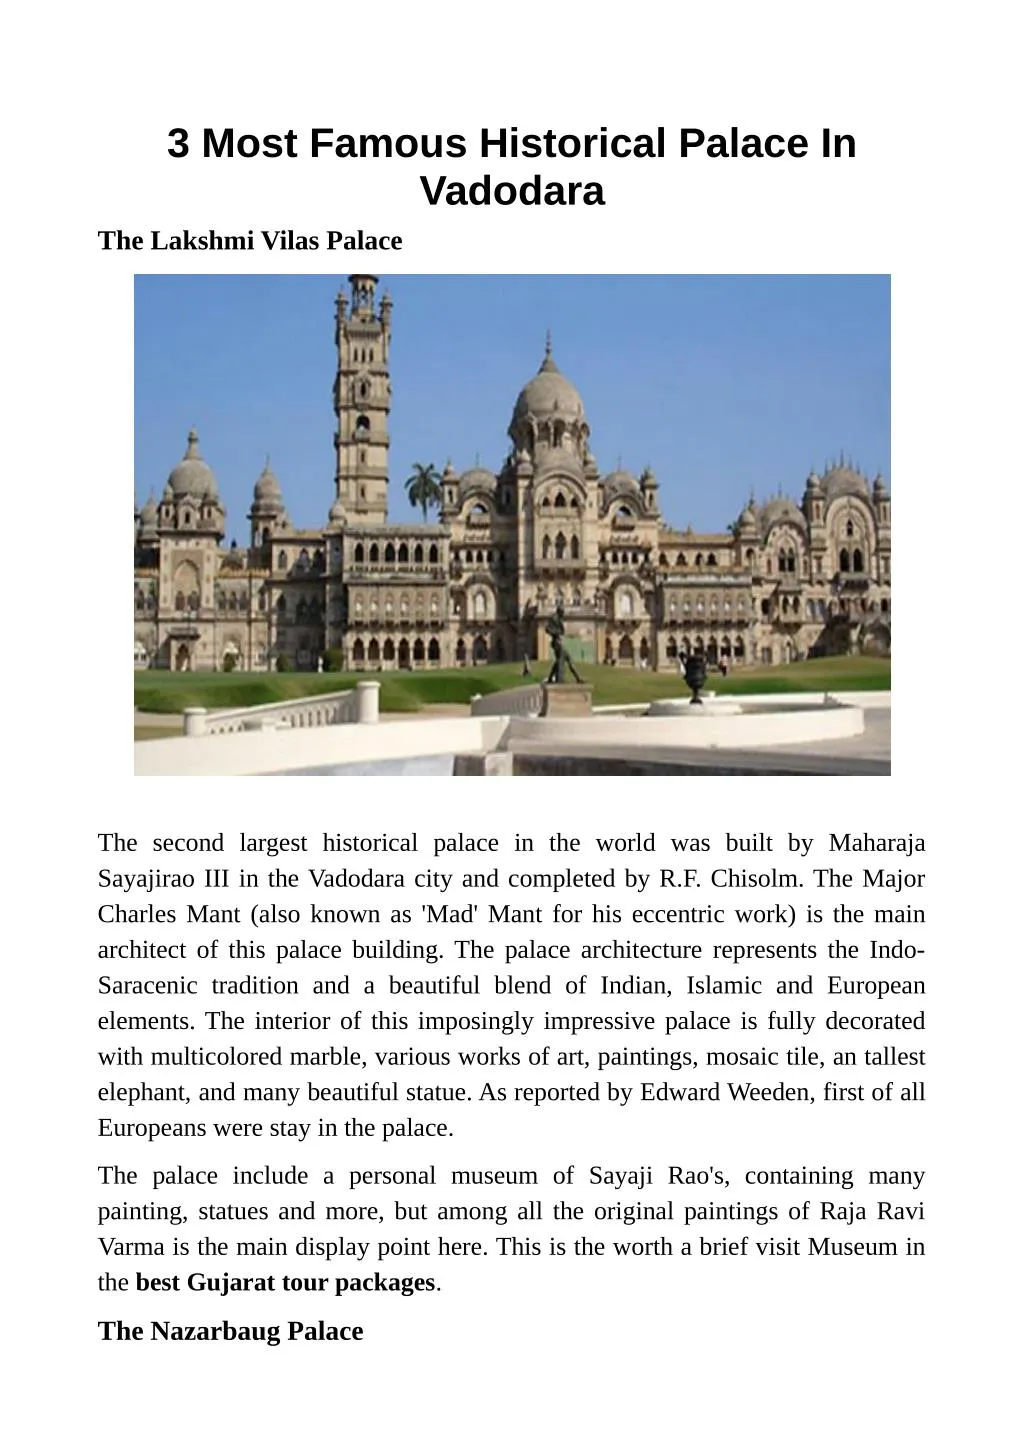 3 most famous historical palace in vadodara